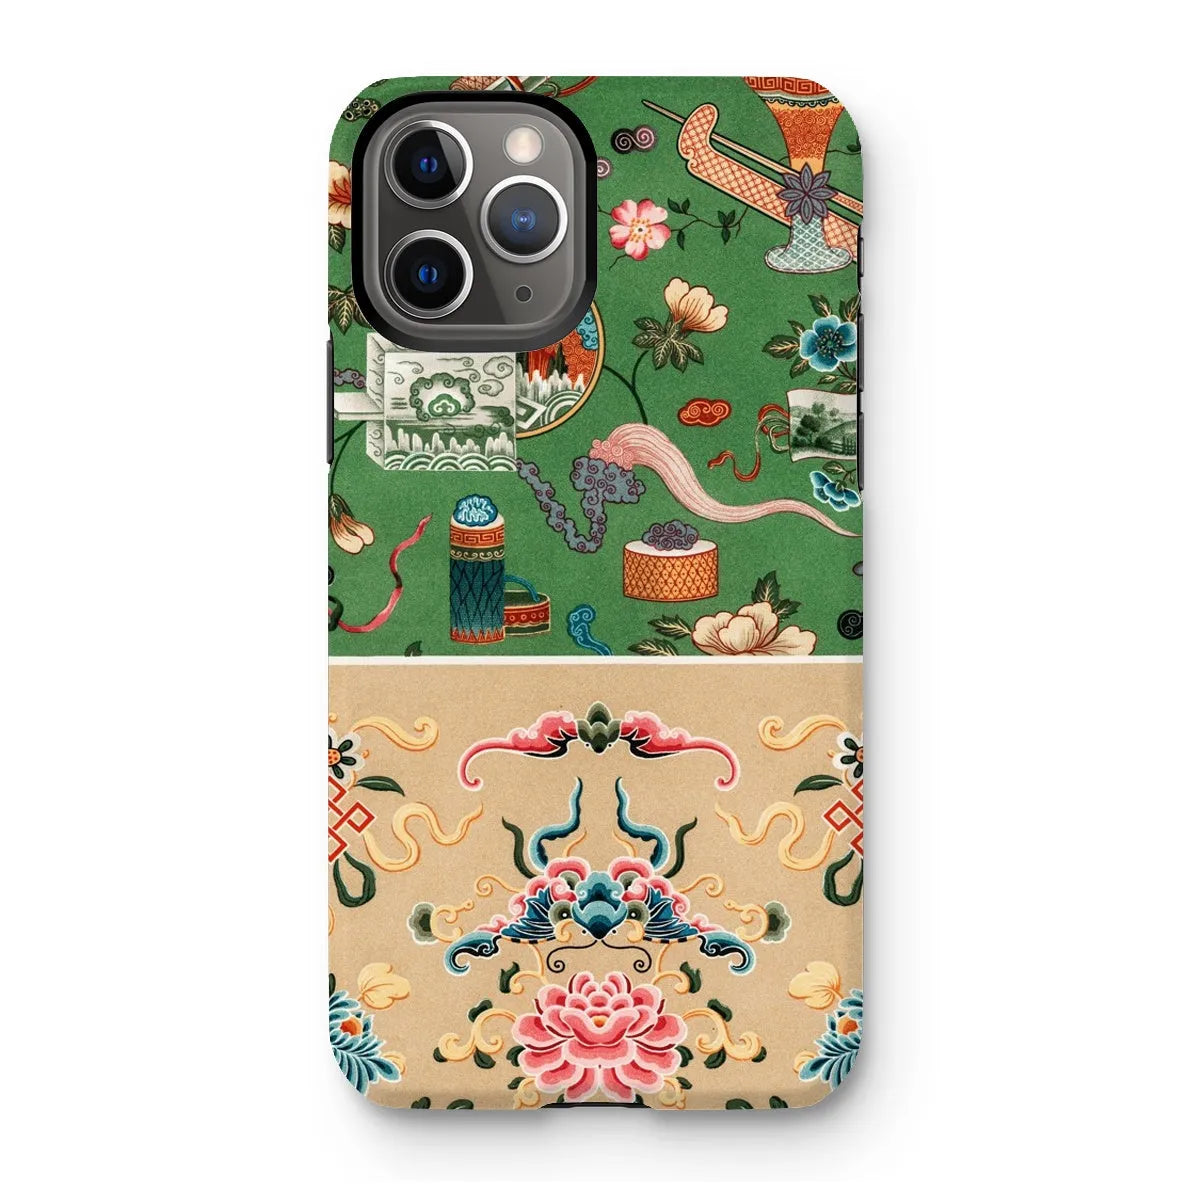 This Chinese Pattern By Auguste Racinet Tough Phone Case - Iphone 11 Pro / Matte - Mobile Phone Cases - Aesthetic Art